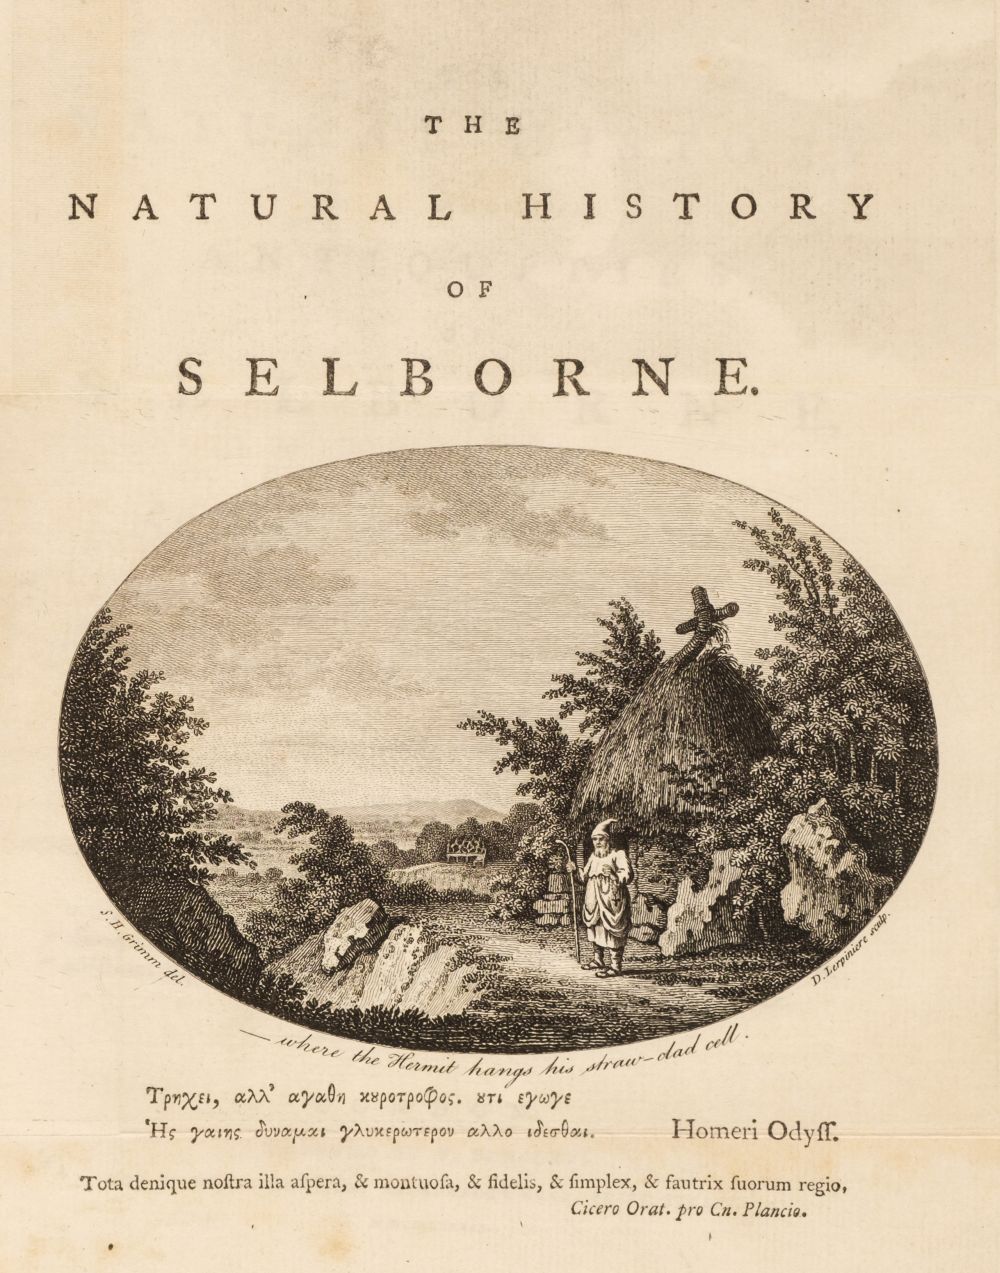 White (Gilbert). The Natural History and Antiquities of Selborne in the County of Southampton